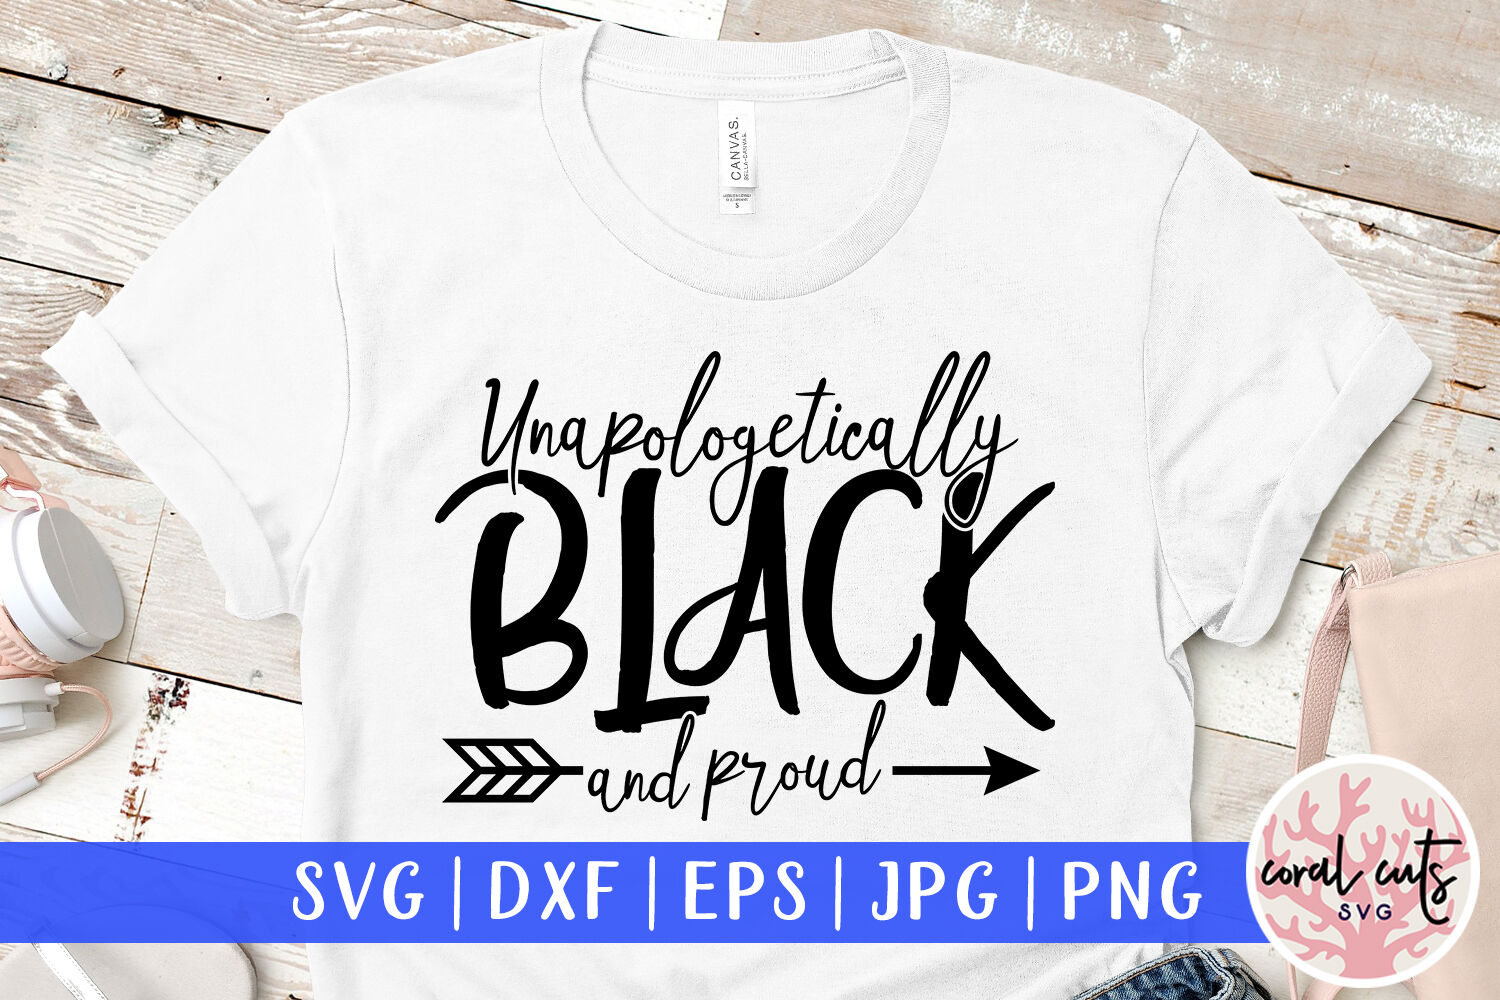 Download Unapologetically black and proud - Women Empowerment SVG ...